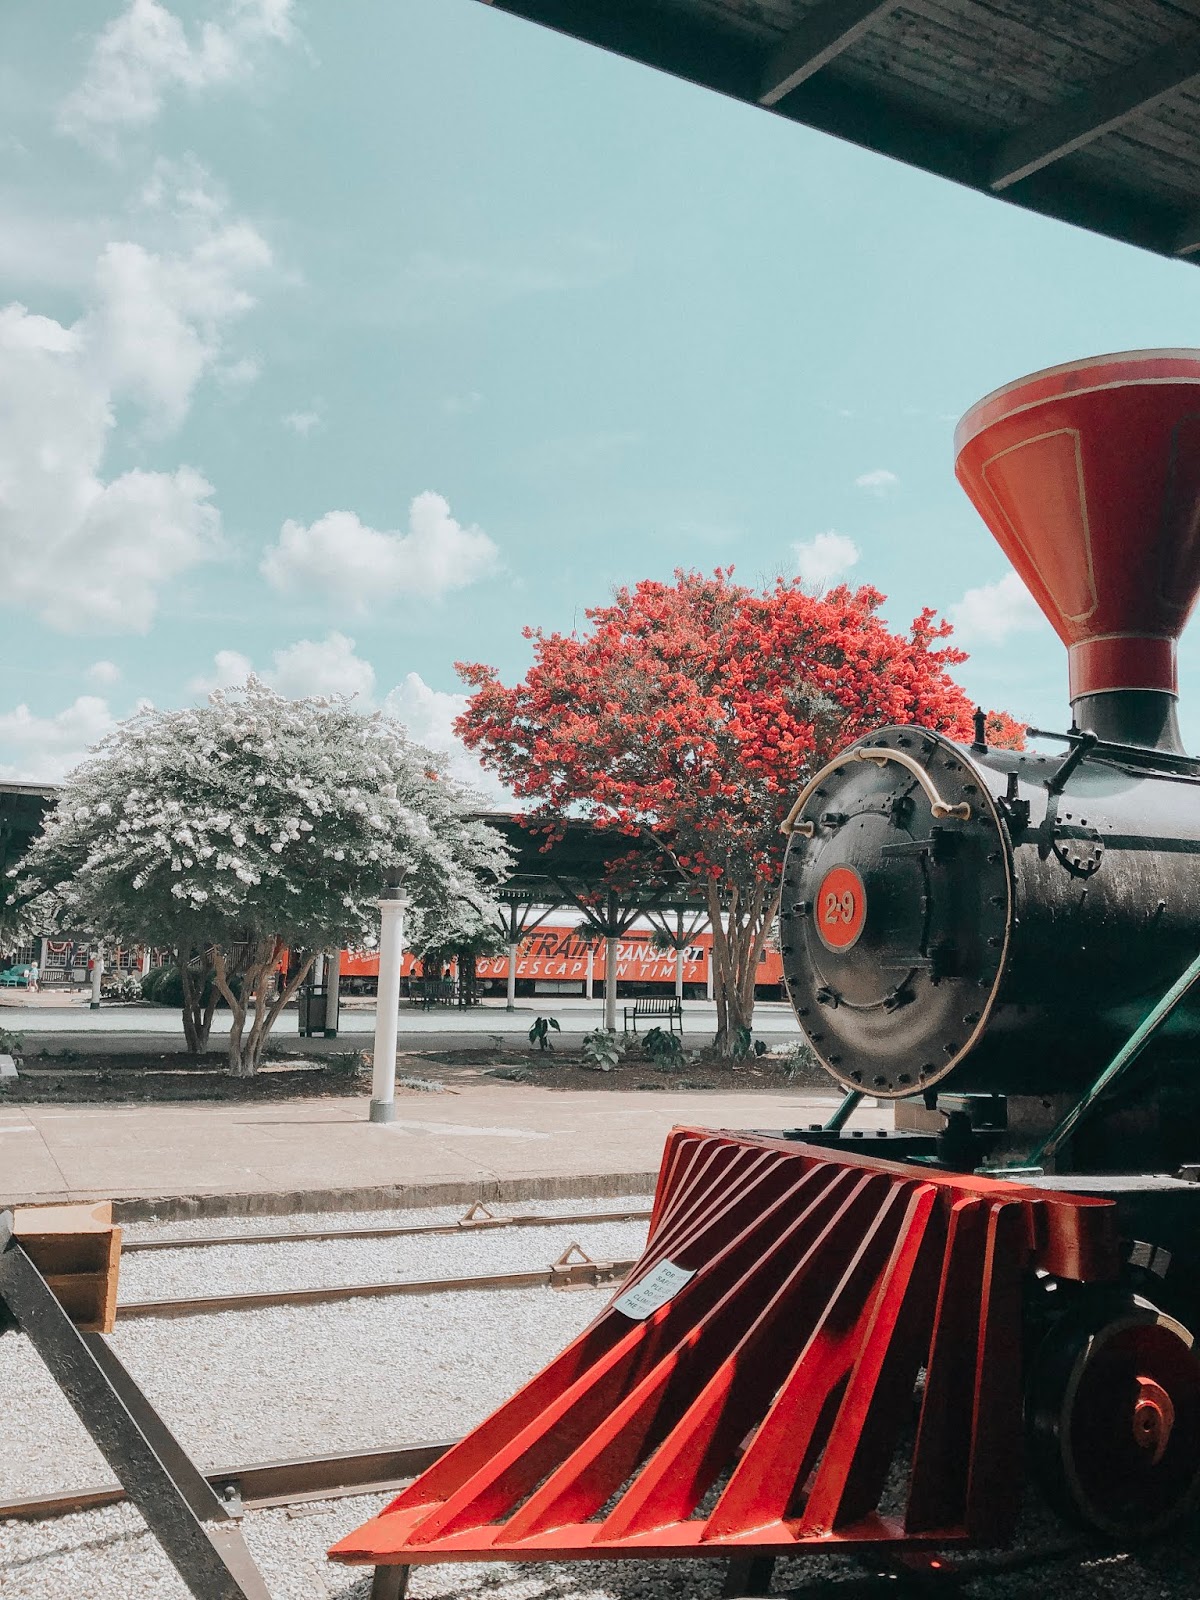 Chattanooga Choo Choo Hotel | Chattanooga Tennessee Travel Guide | Affordable by Amanda